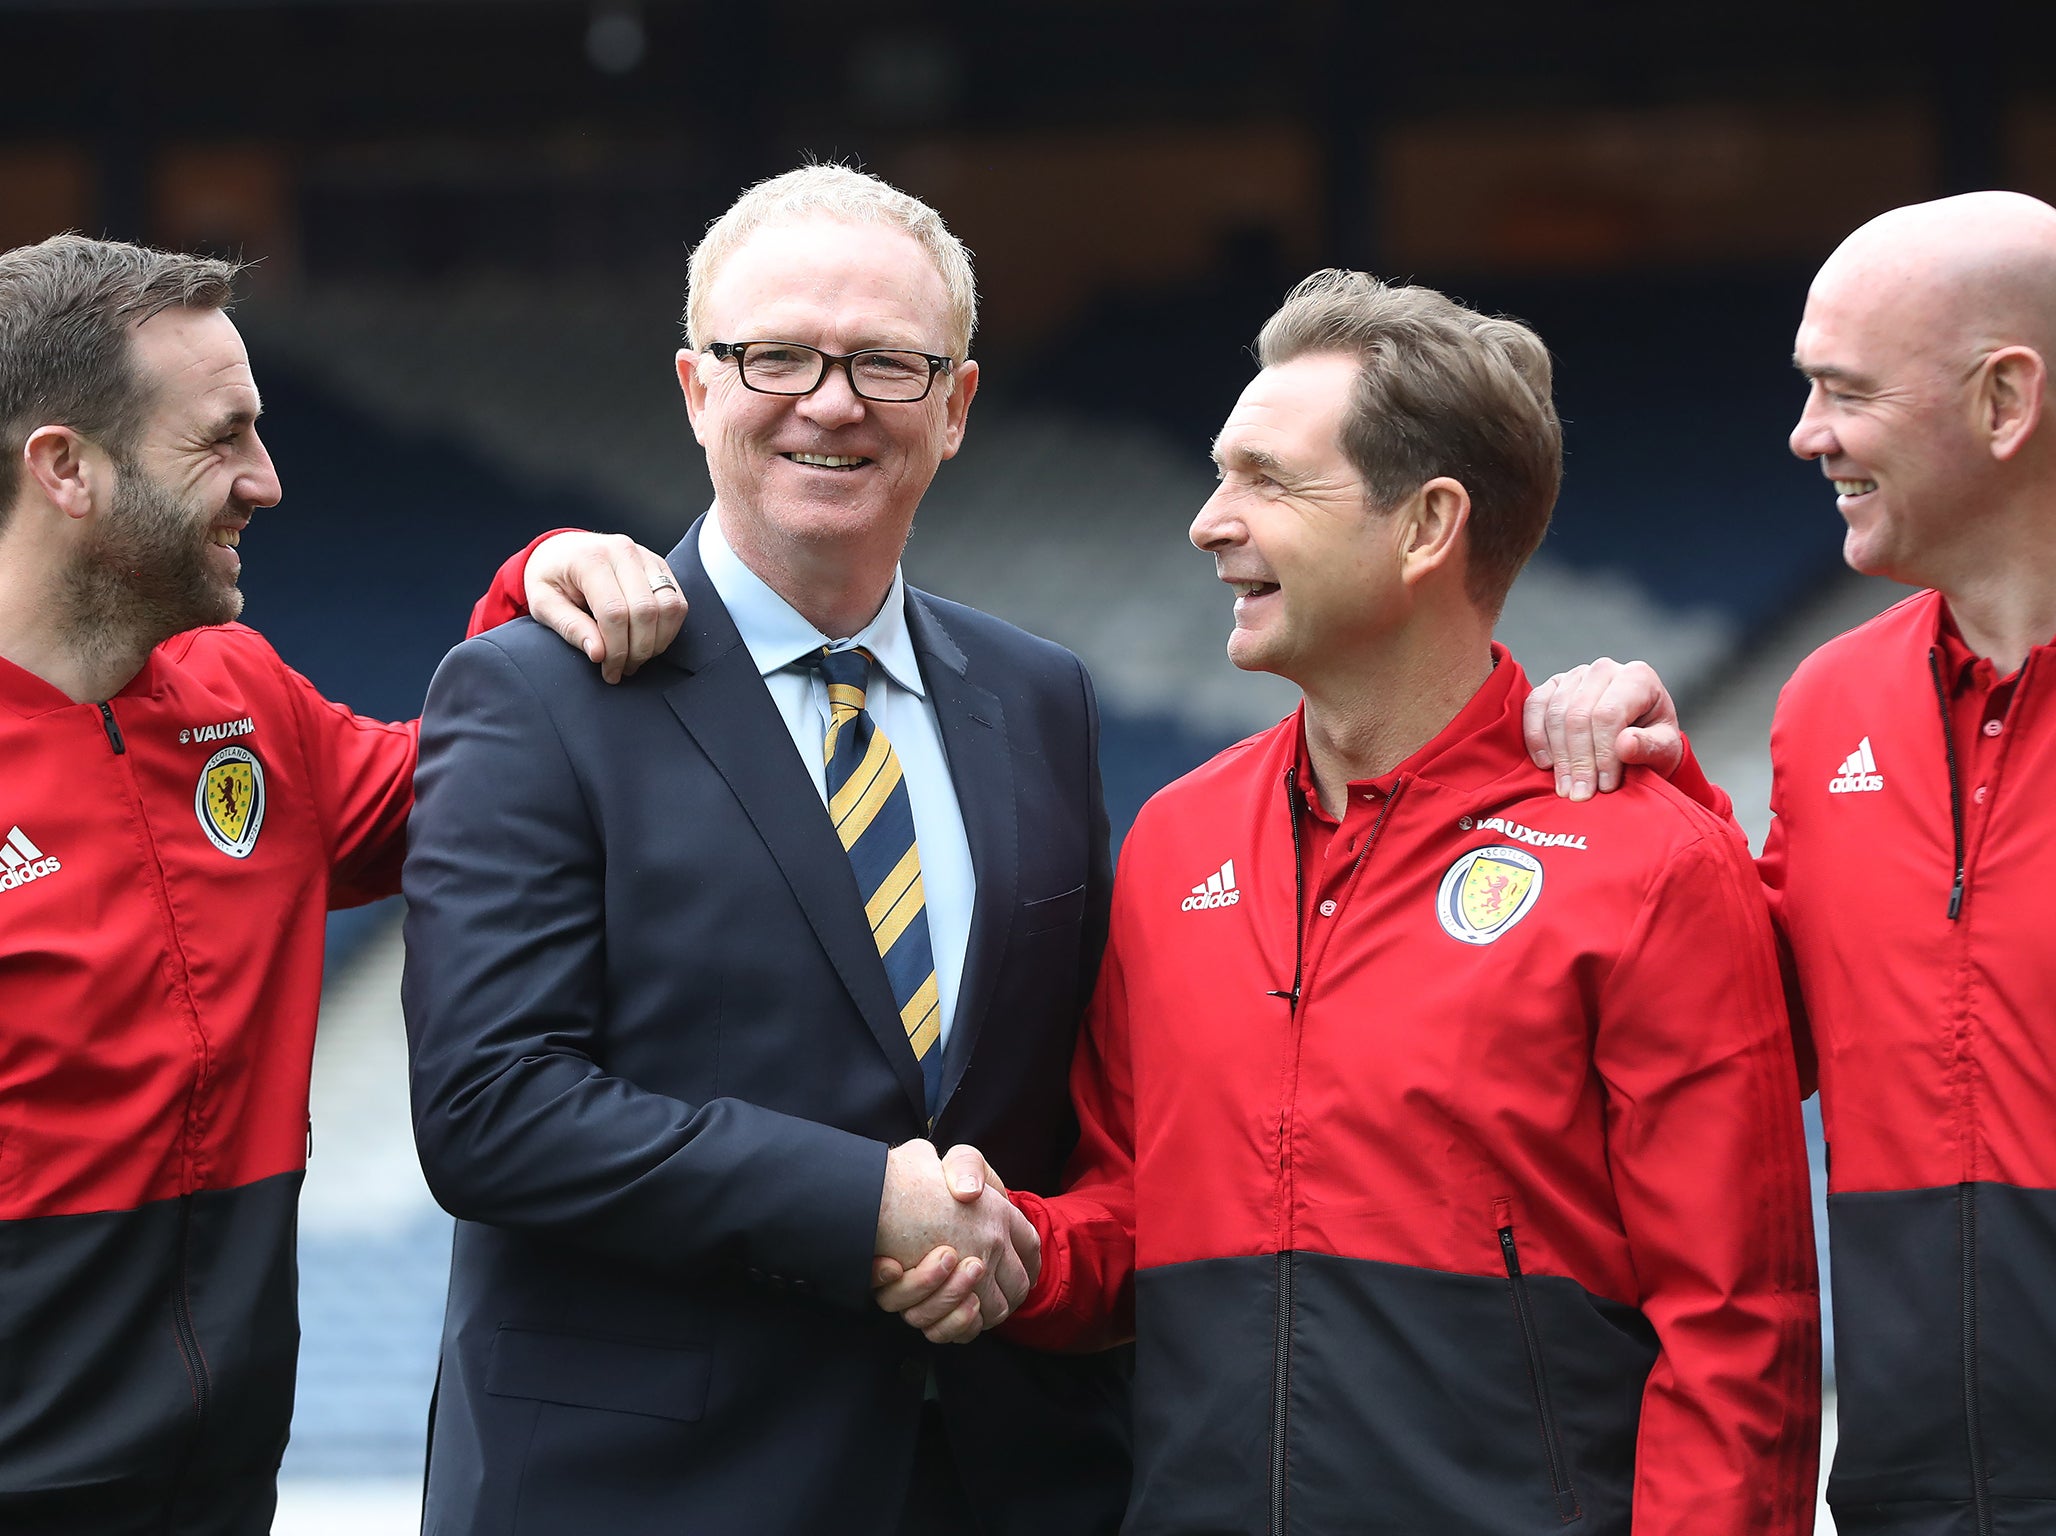 Alex McLeish with assistant coaches James McFadden, Peter Grant and Stevie Woods